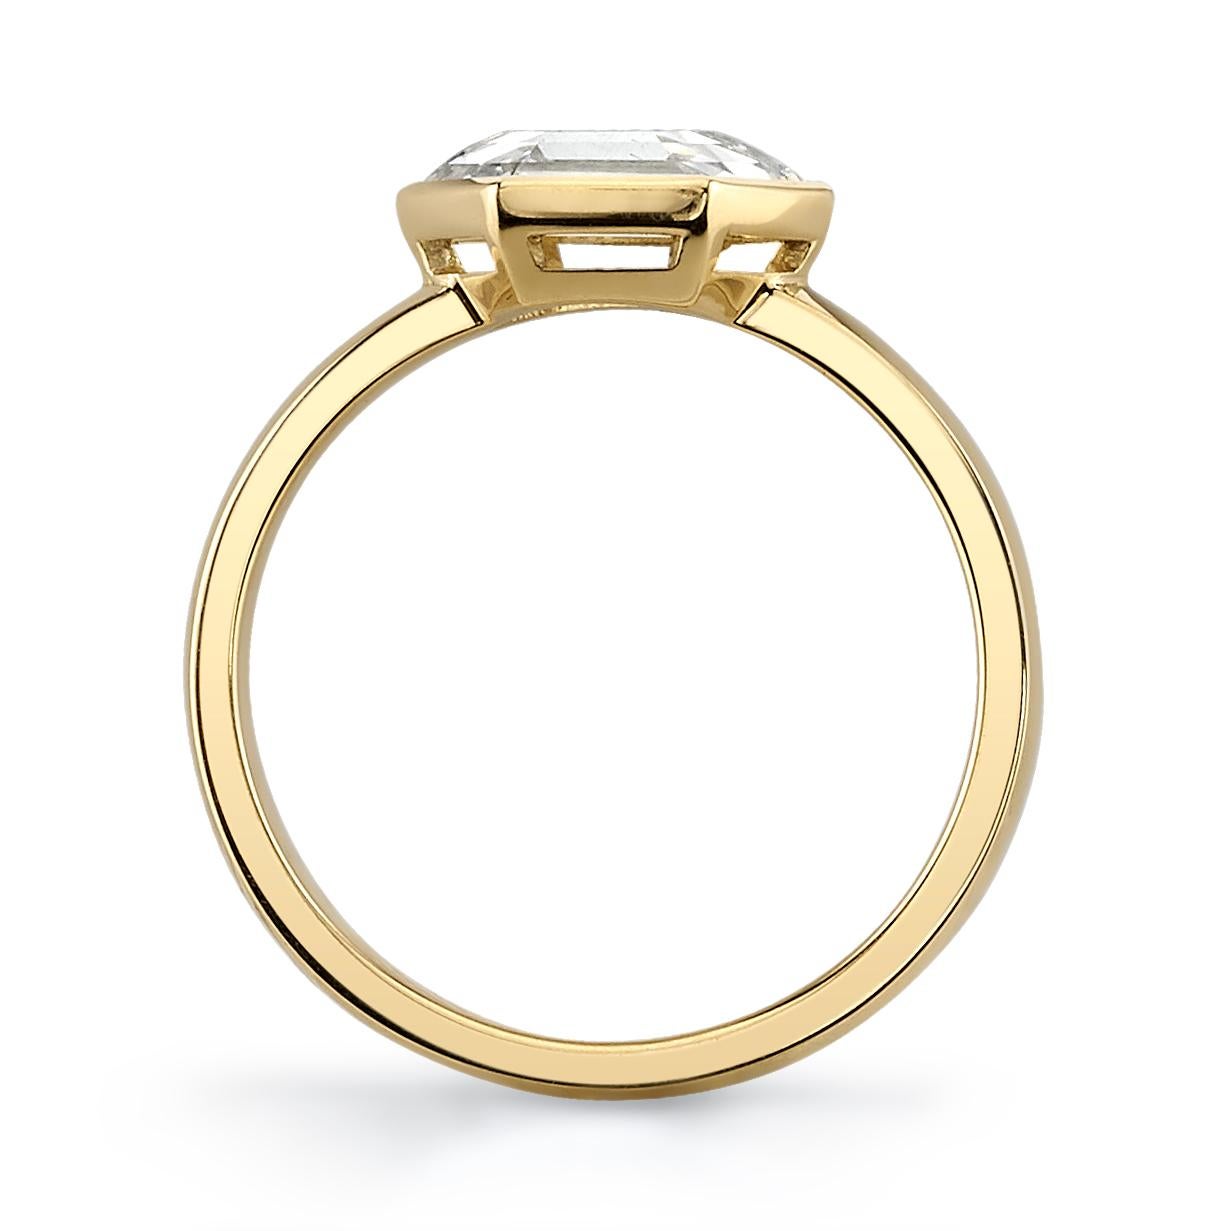 1.41ct I/SI1 GIA certified portrait cut hexagon diamond set in a handcrafted 18K yellow gold setting. Ring is currently a size 6 and can be sized to fit.